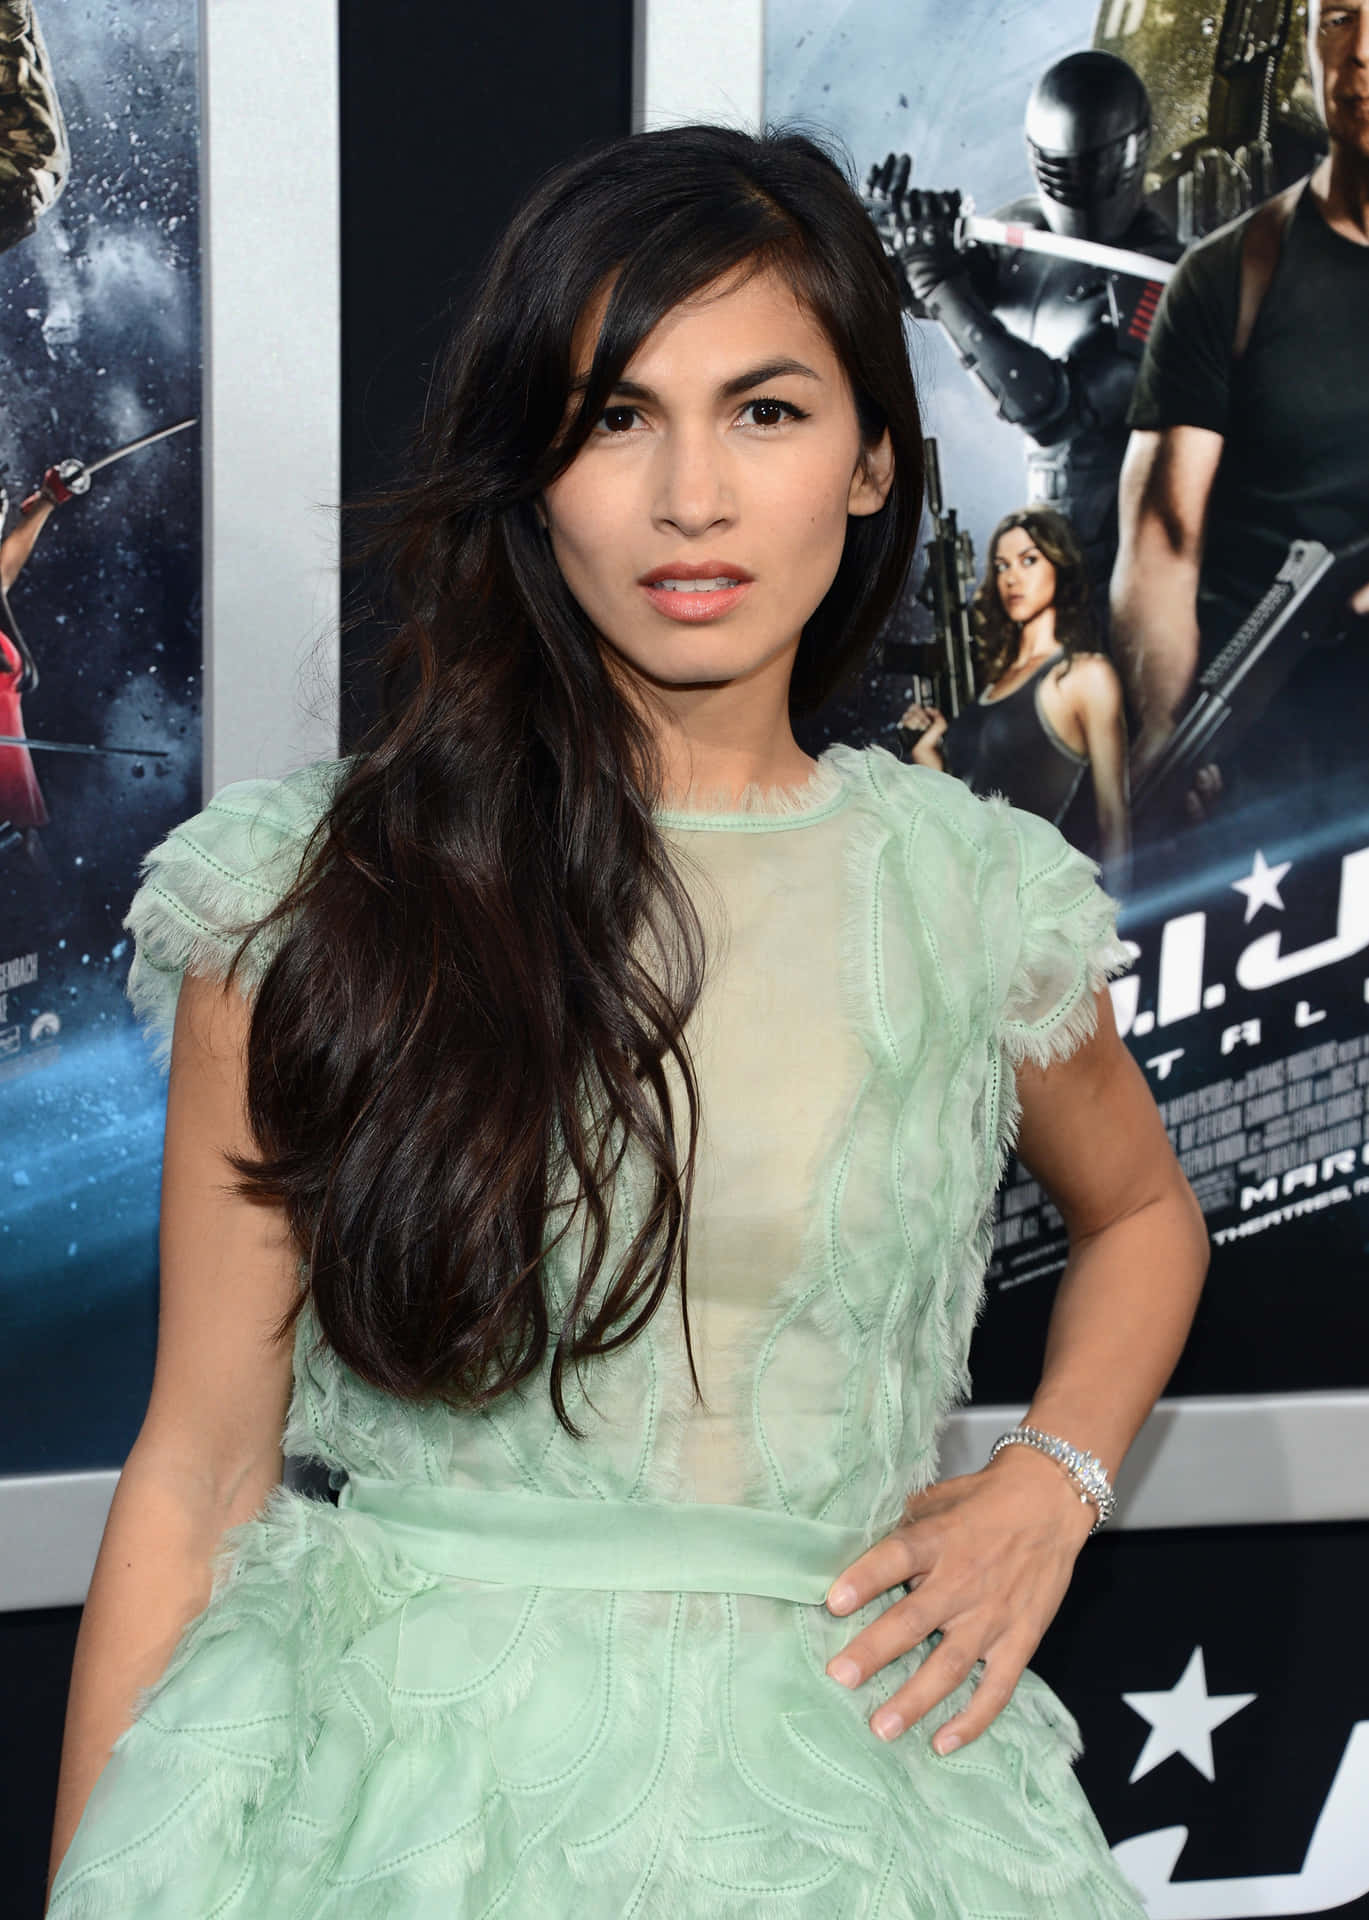 "Elodie Yung shows her intensity in this stylish portrait." Wallpaper